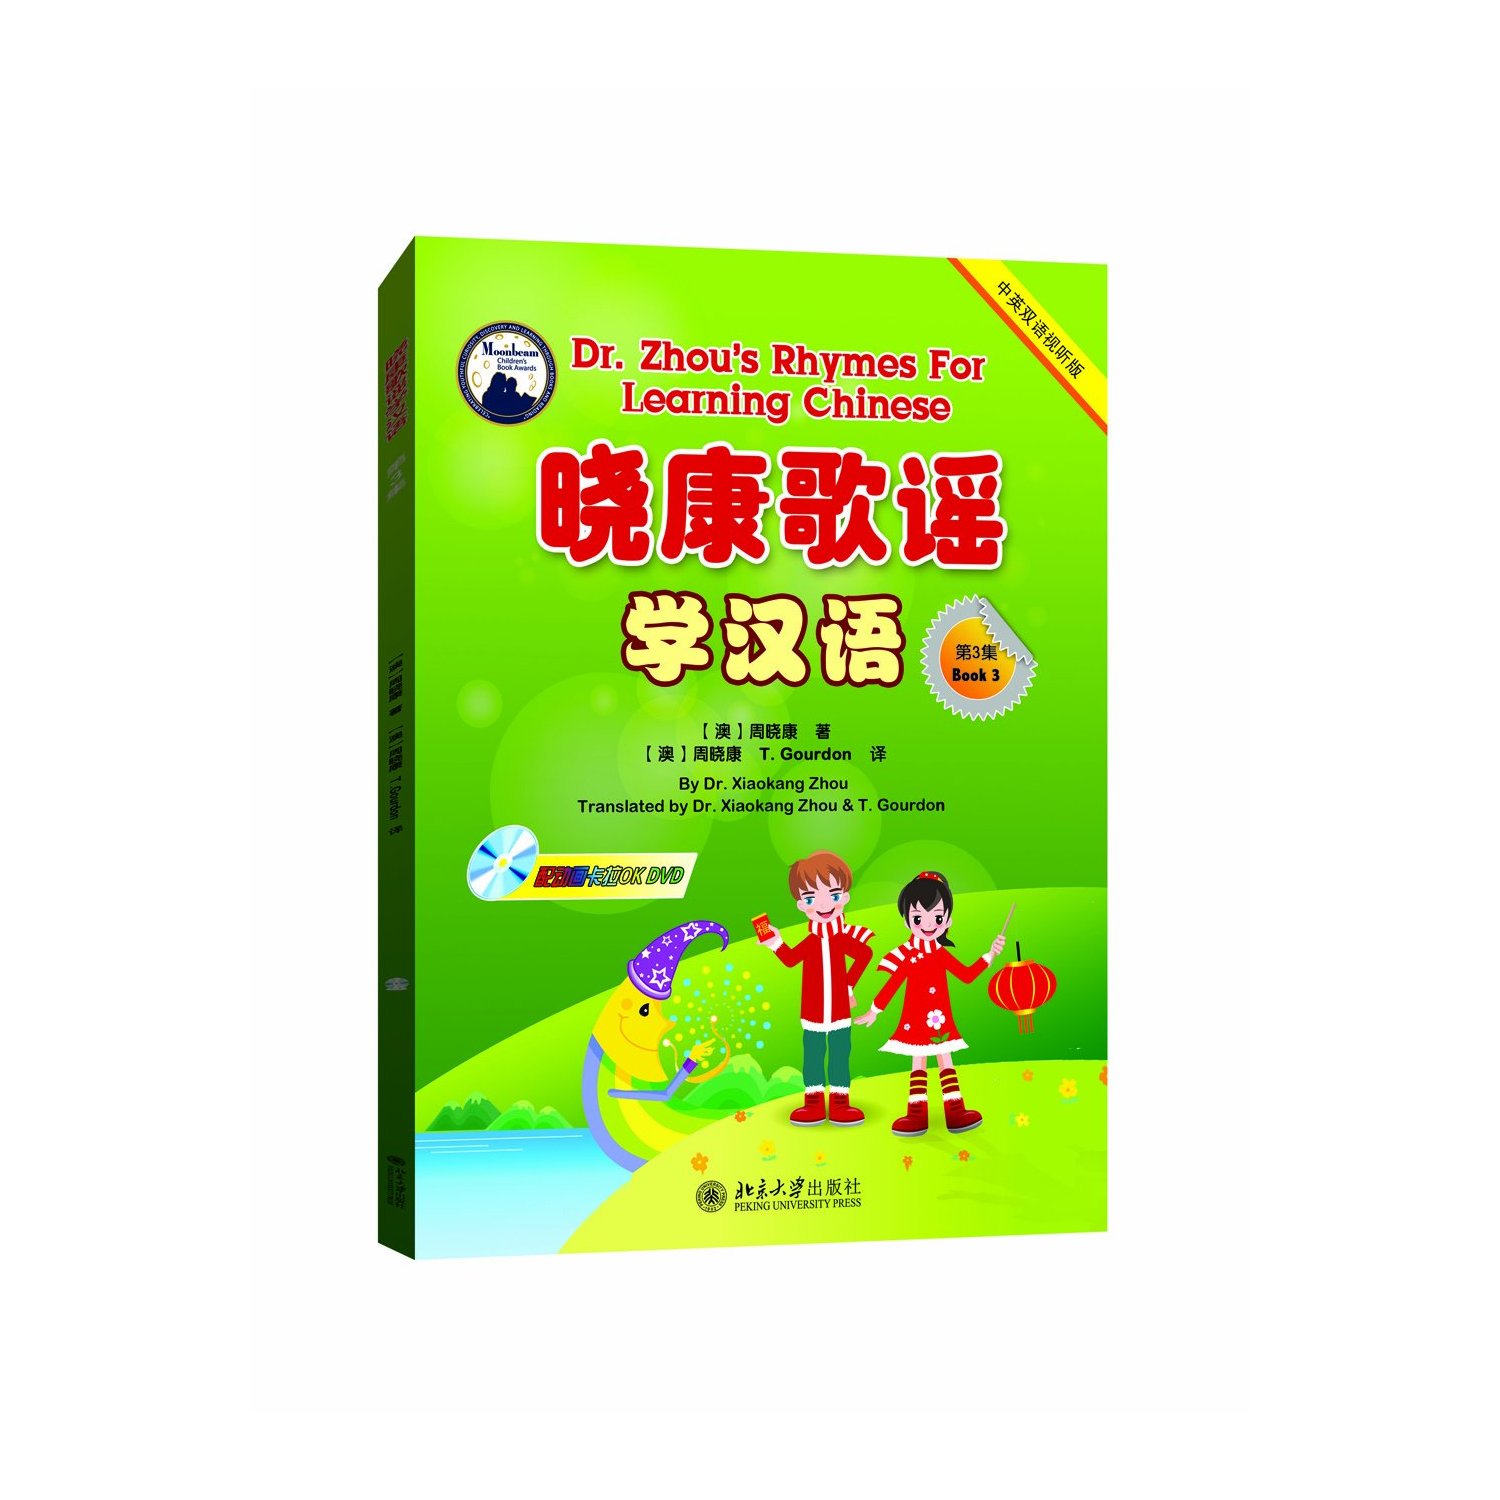  Dr. Zhou''s Rhymes for Learning Chinese Vol. 3 (wit (Dr. Zhou''s Rhymes for Learning Chinese Vol. 2 (with 1 CD & 1 DVD))